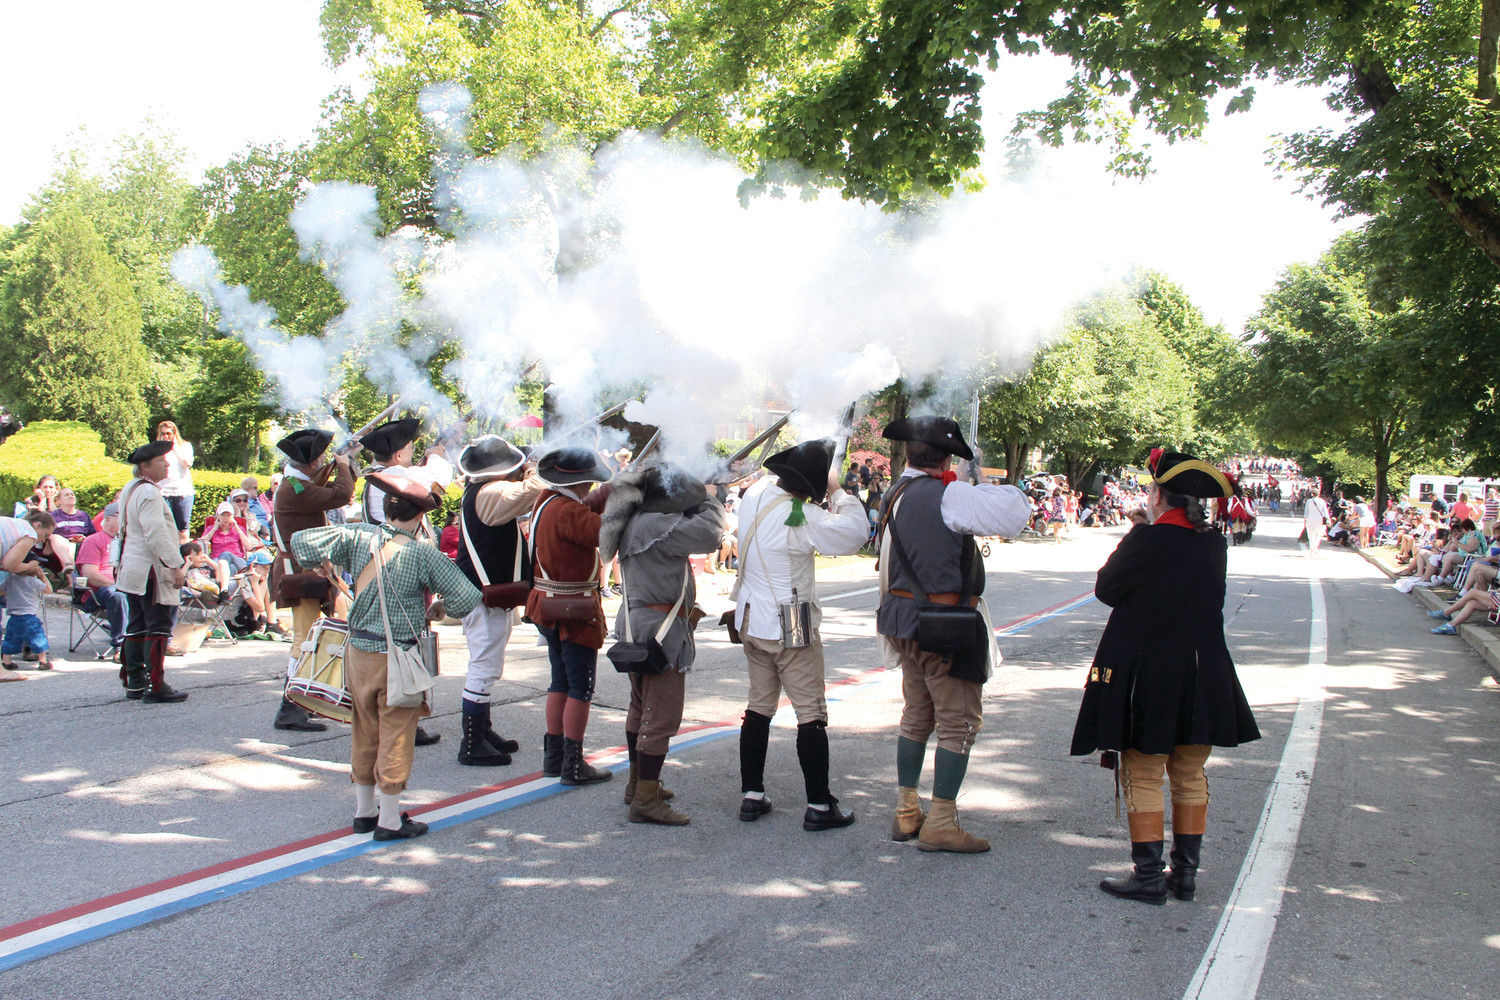 AND WHEN THE SMOKE CLEARED...the Gaspee Days parade carried on.